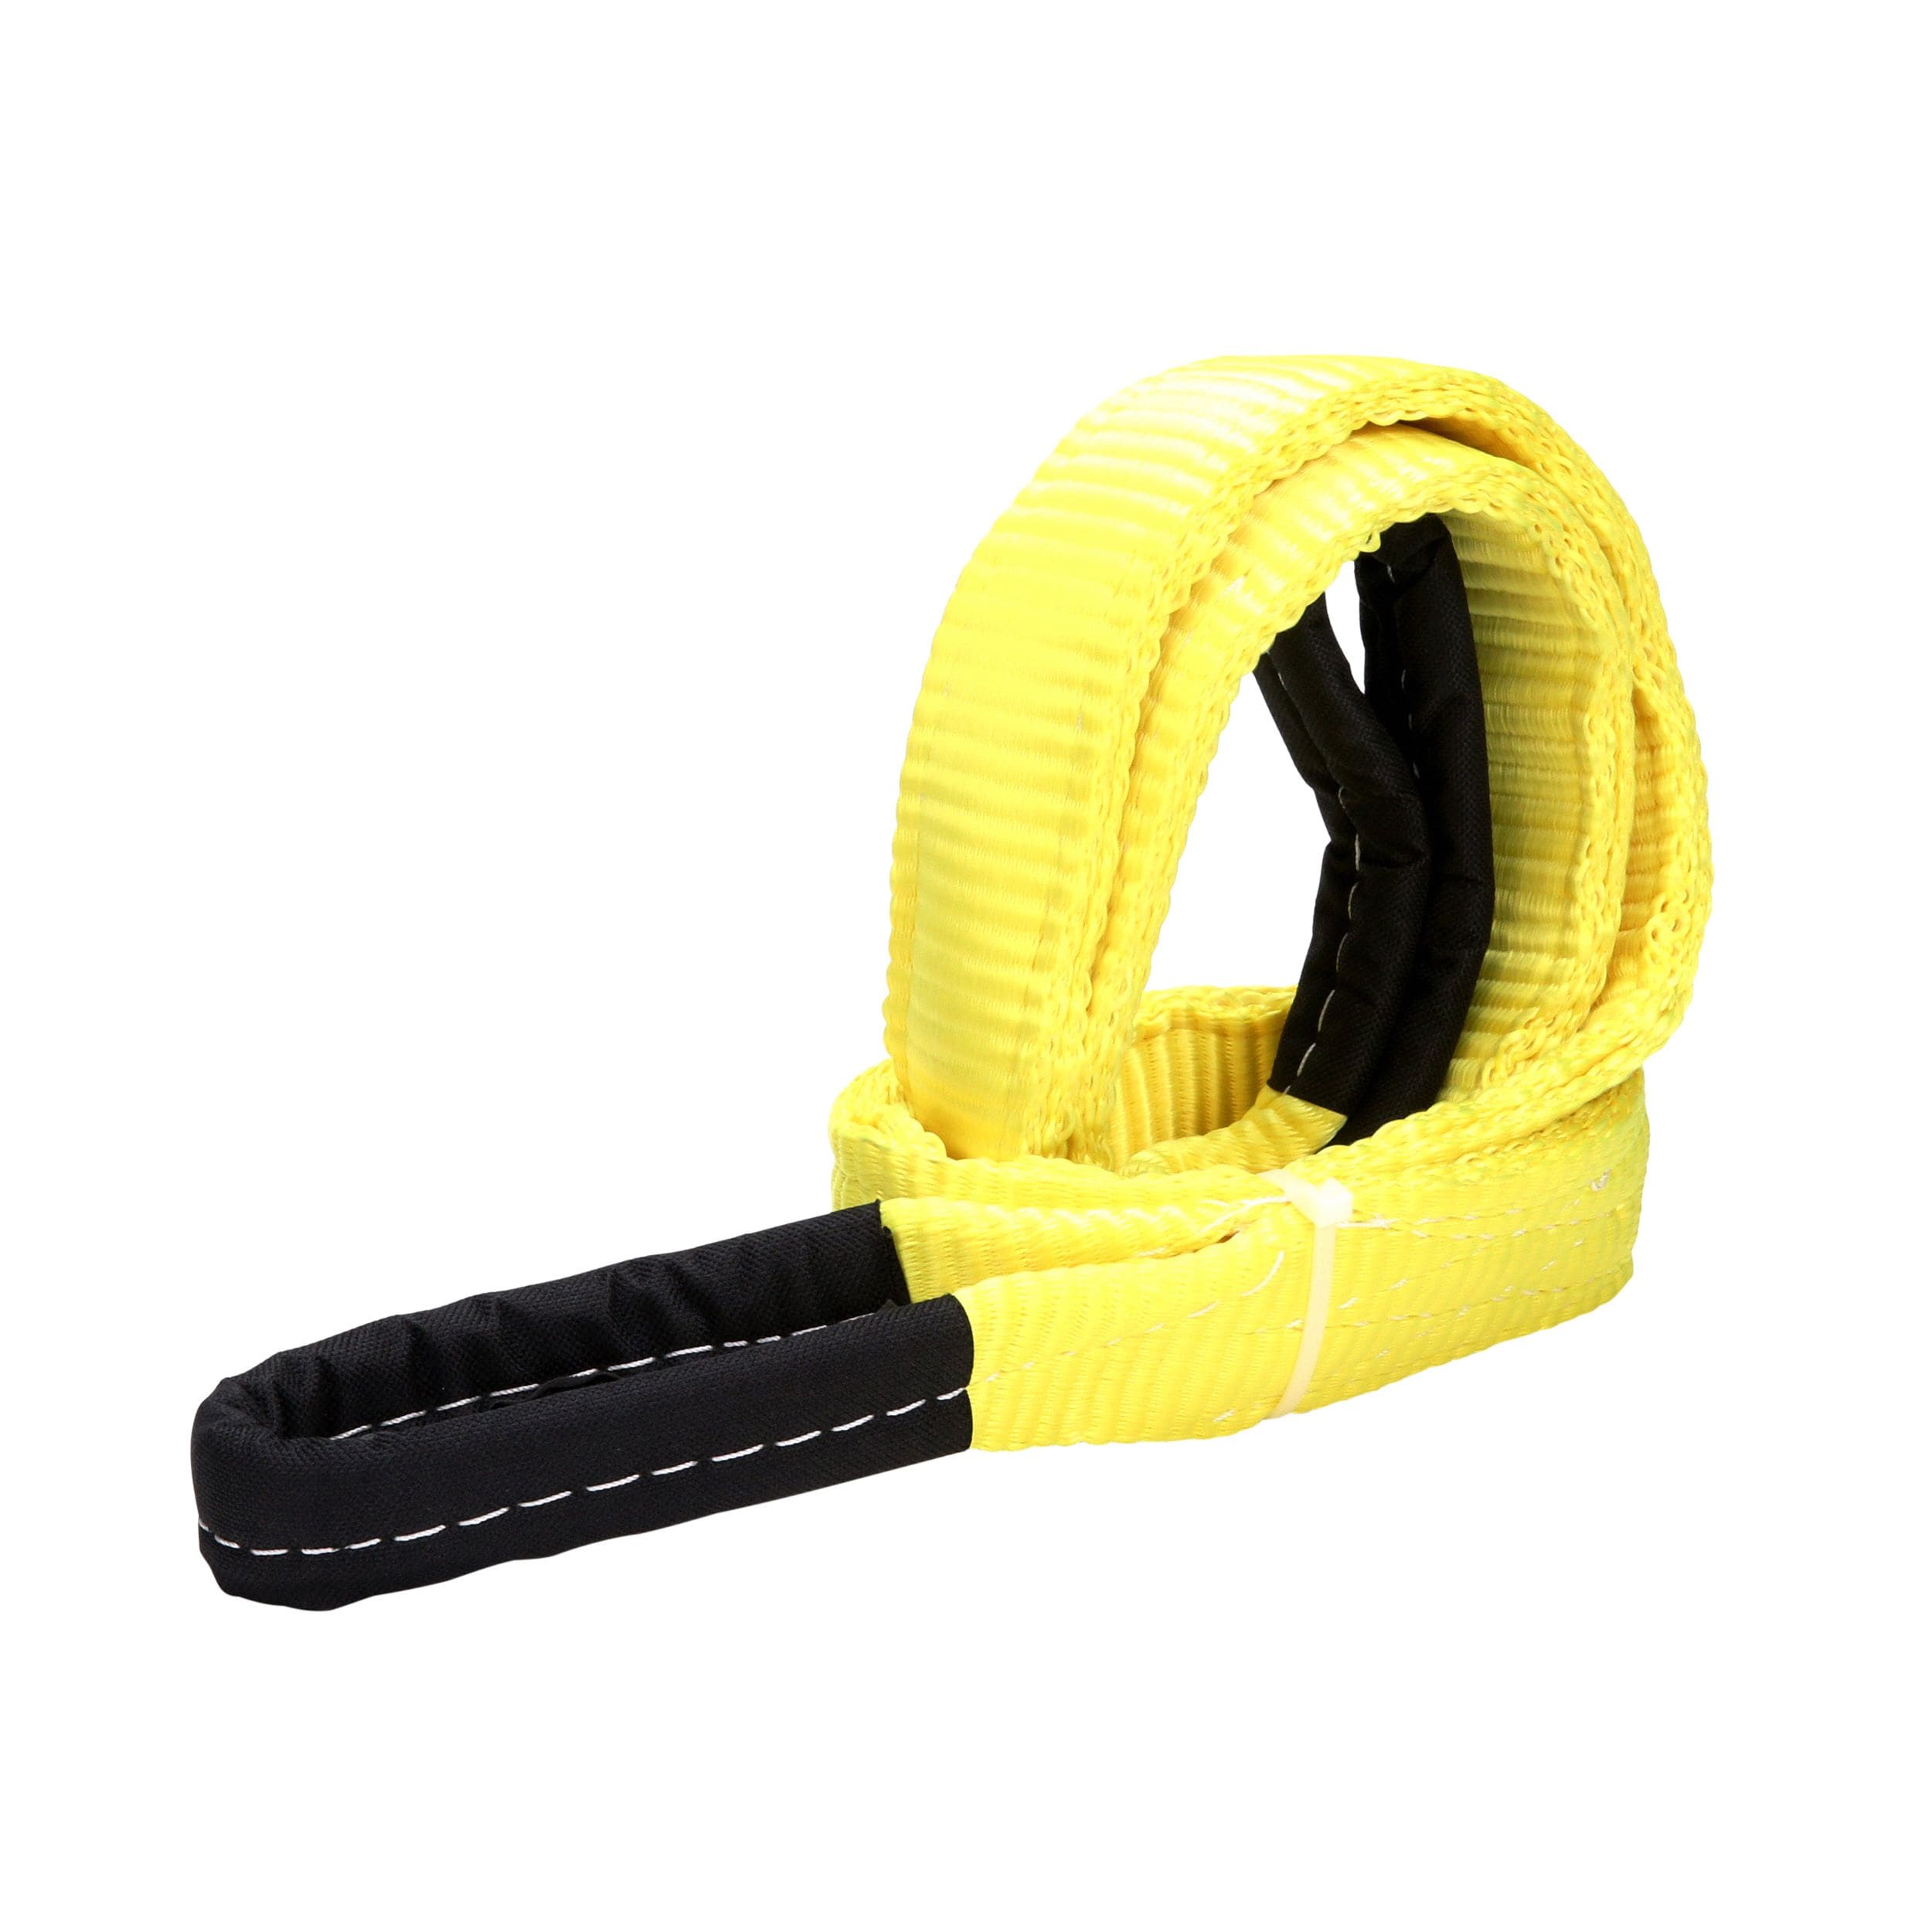 2" Wide 2-Ply Tow & Recovery Straps All Purpose Lifting Slings Tie-Downs 